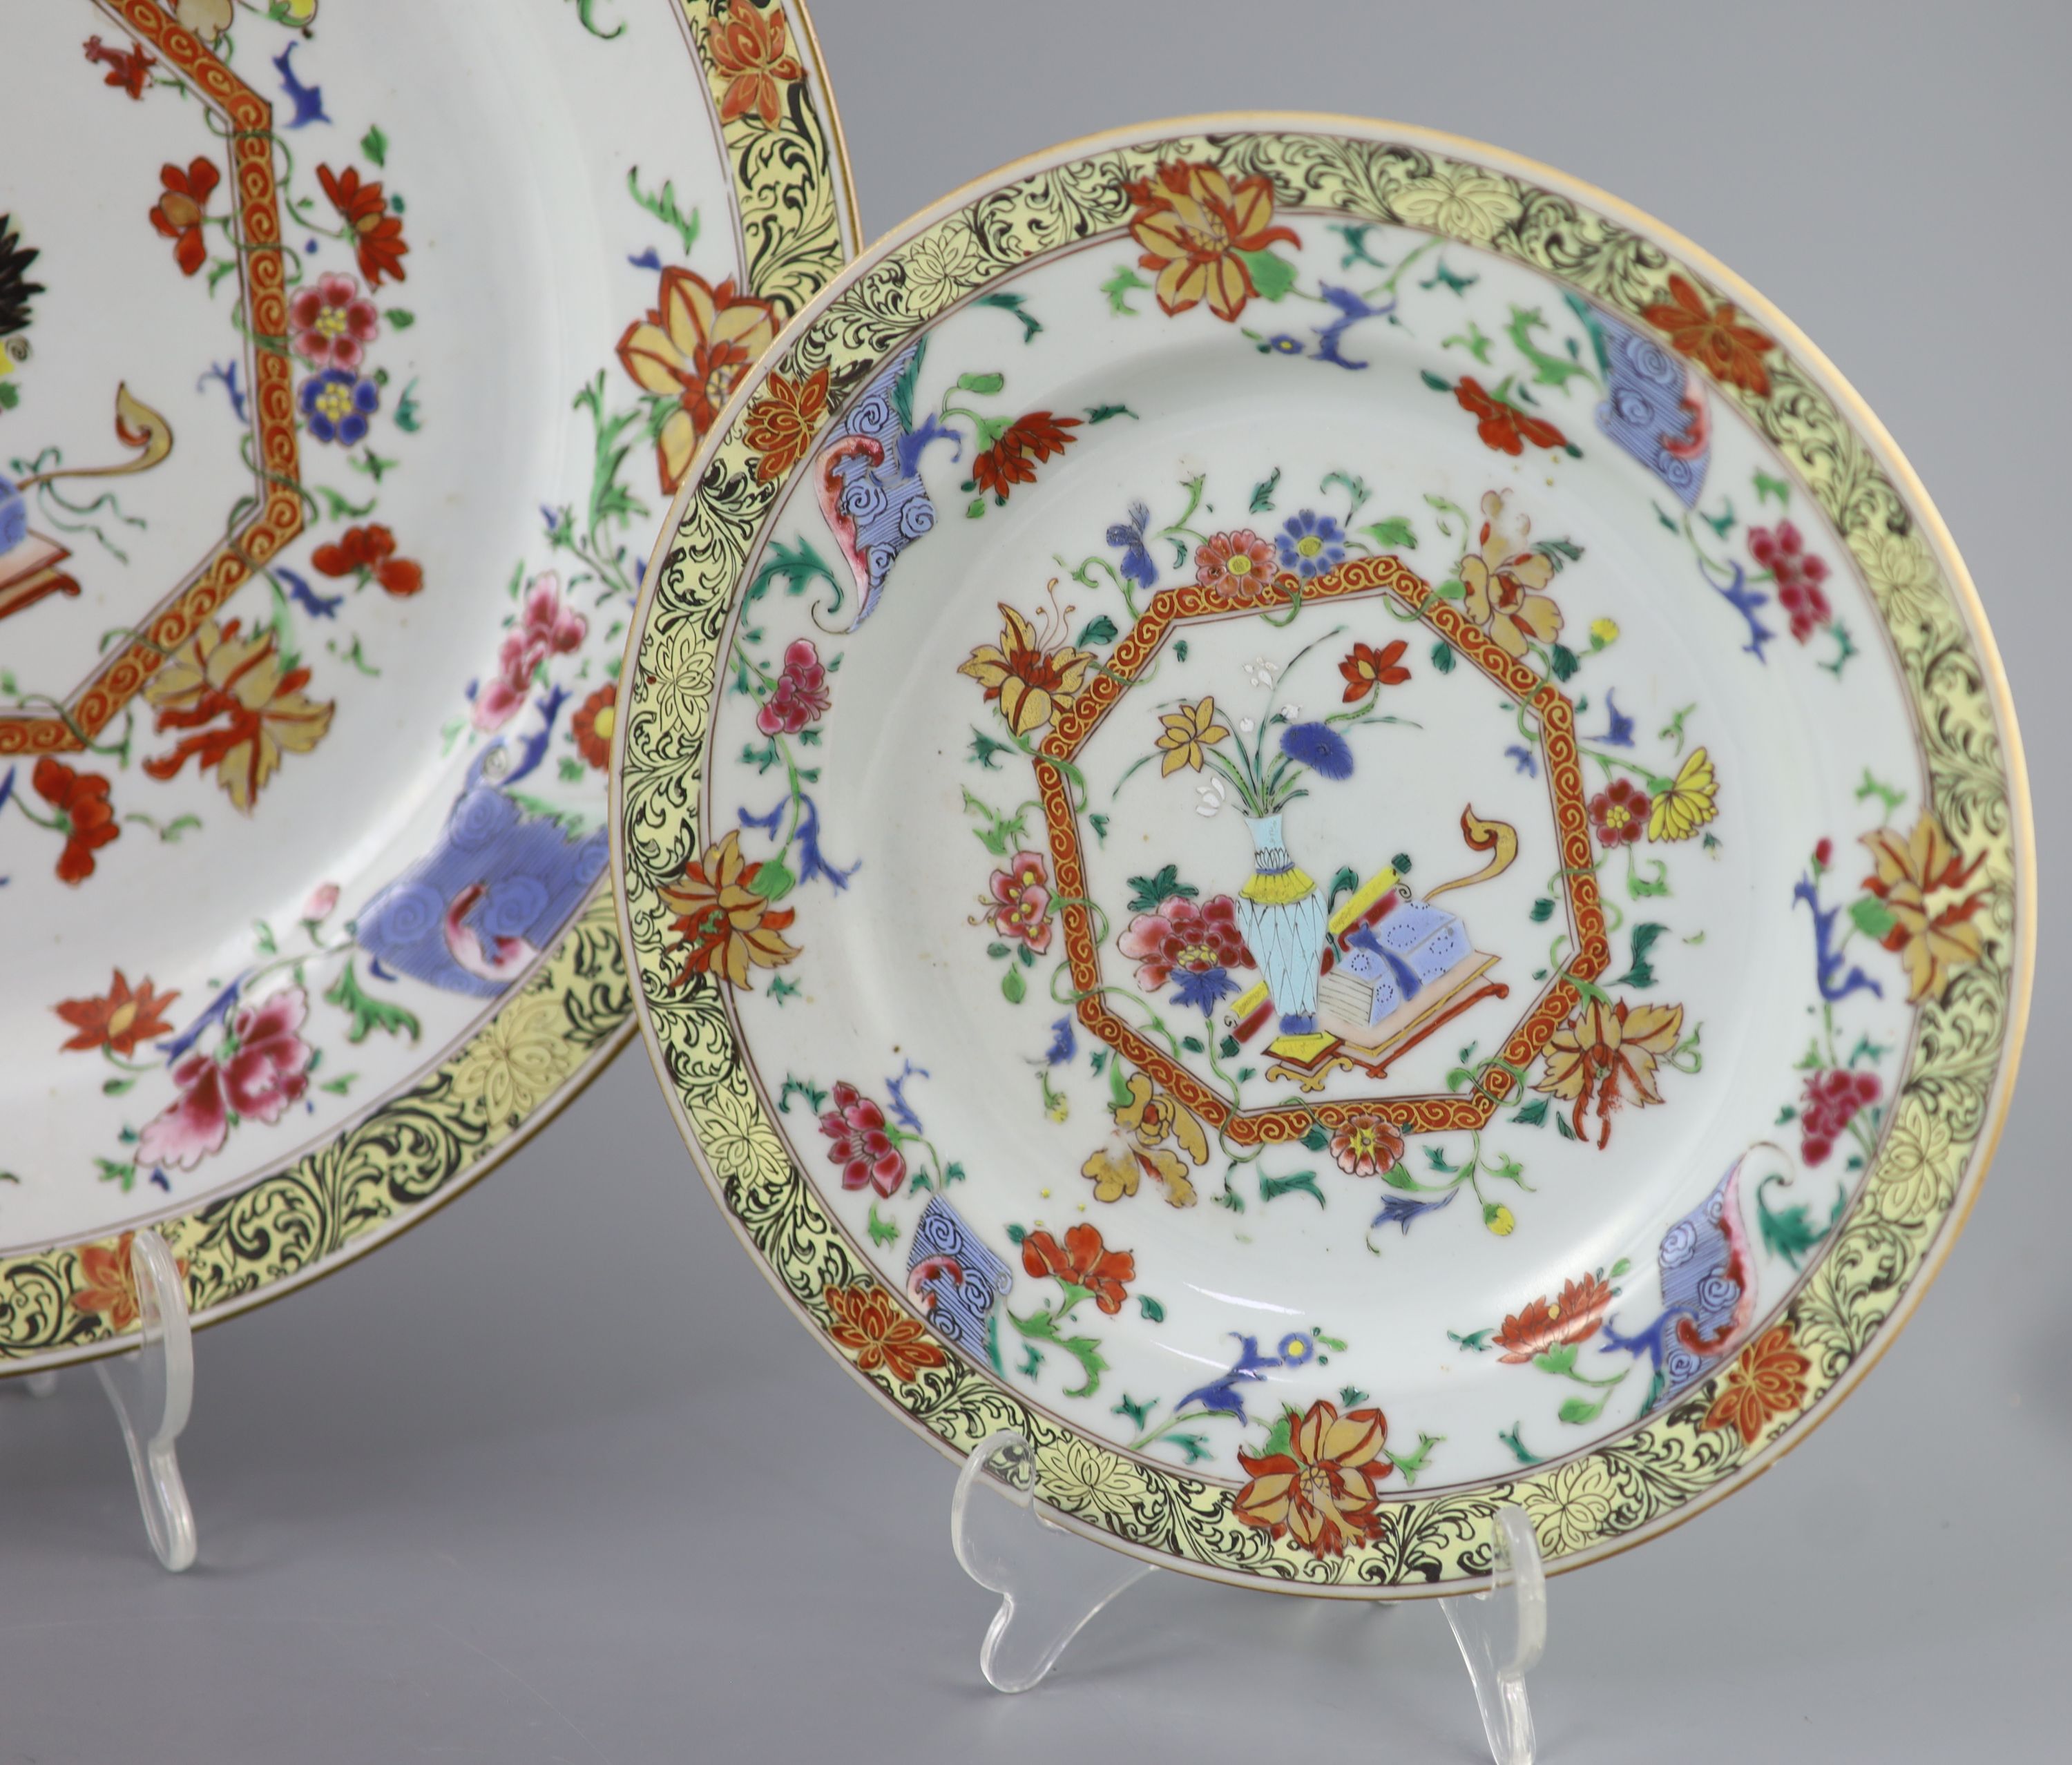 A suite of Qianlong famille rose porcelain: large dish and ten smaller dishes